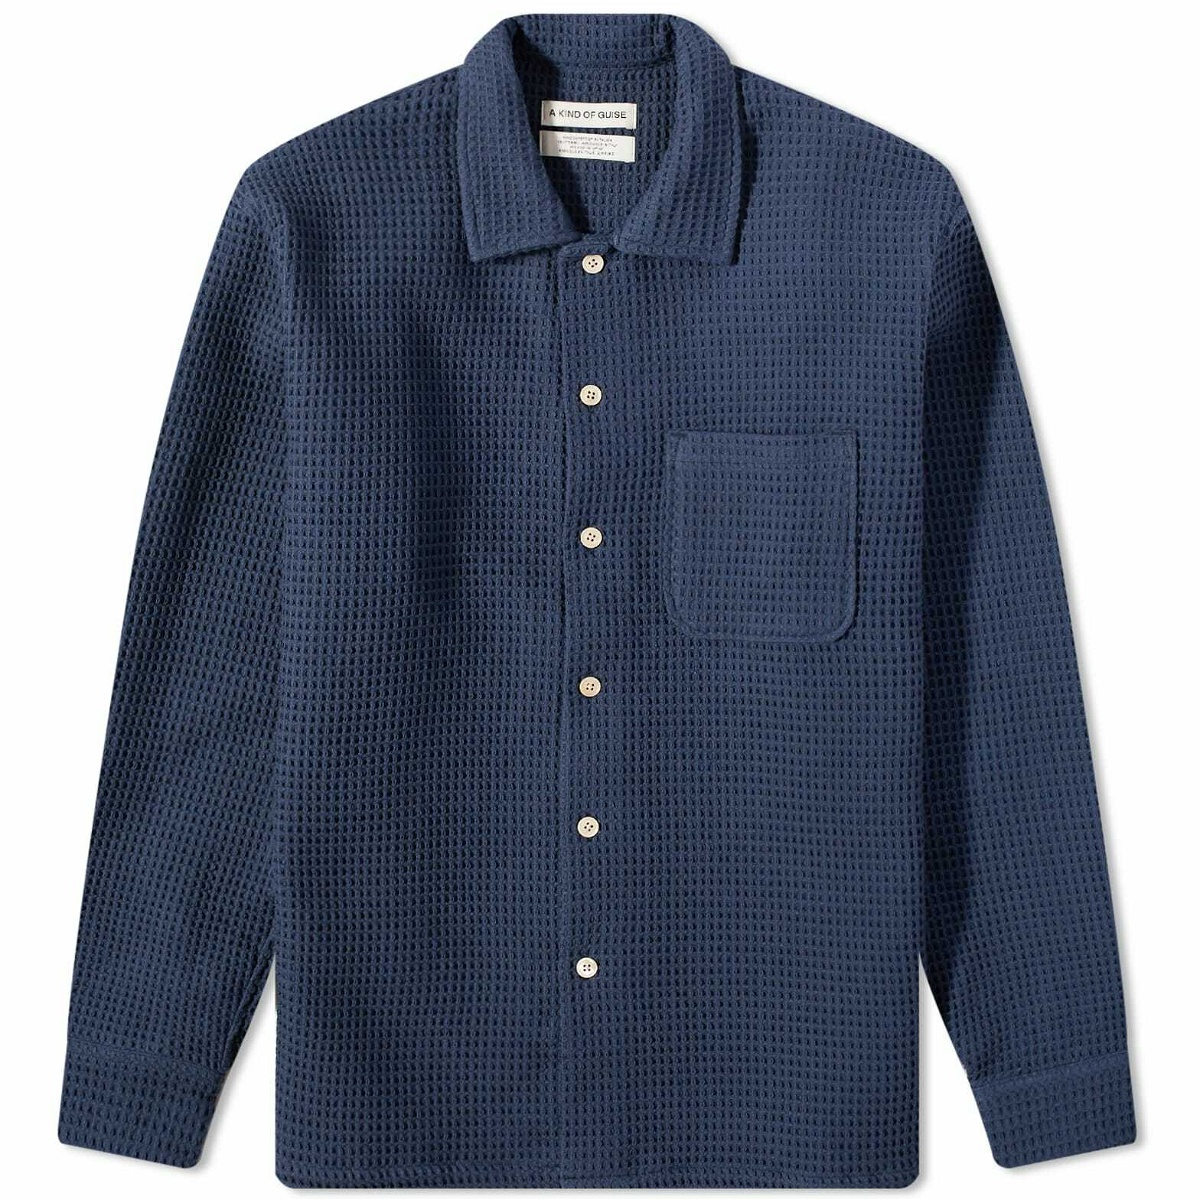 Photo: A Kind of Guise Men's Atrato Shirt in Nightshade Navy